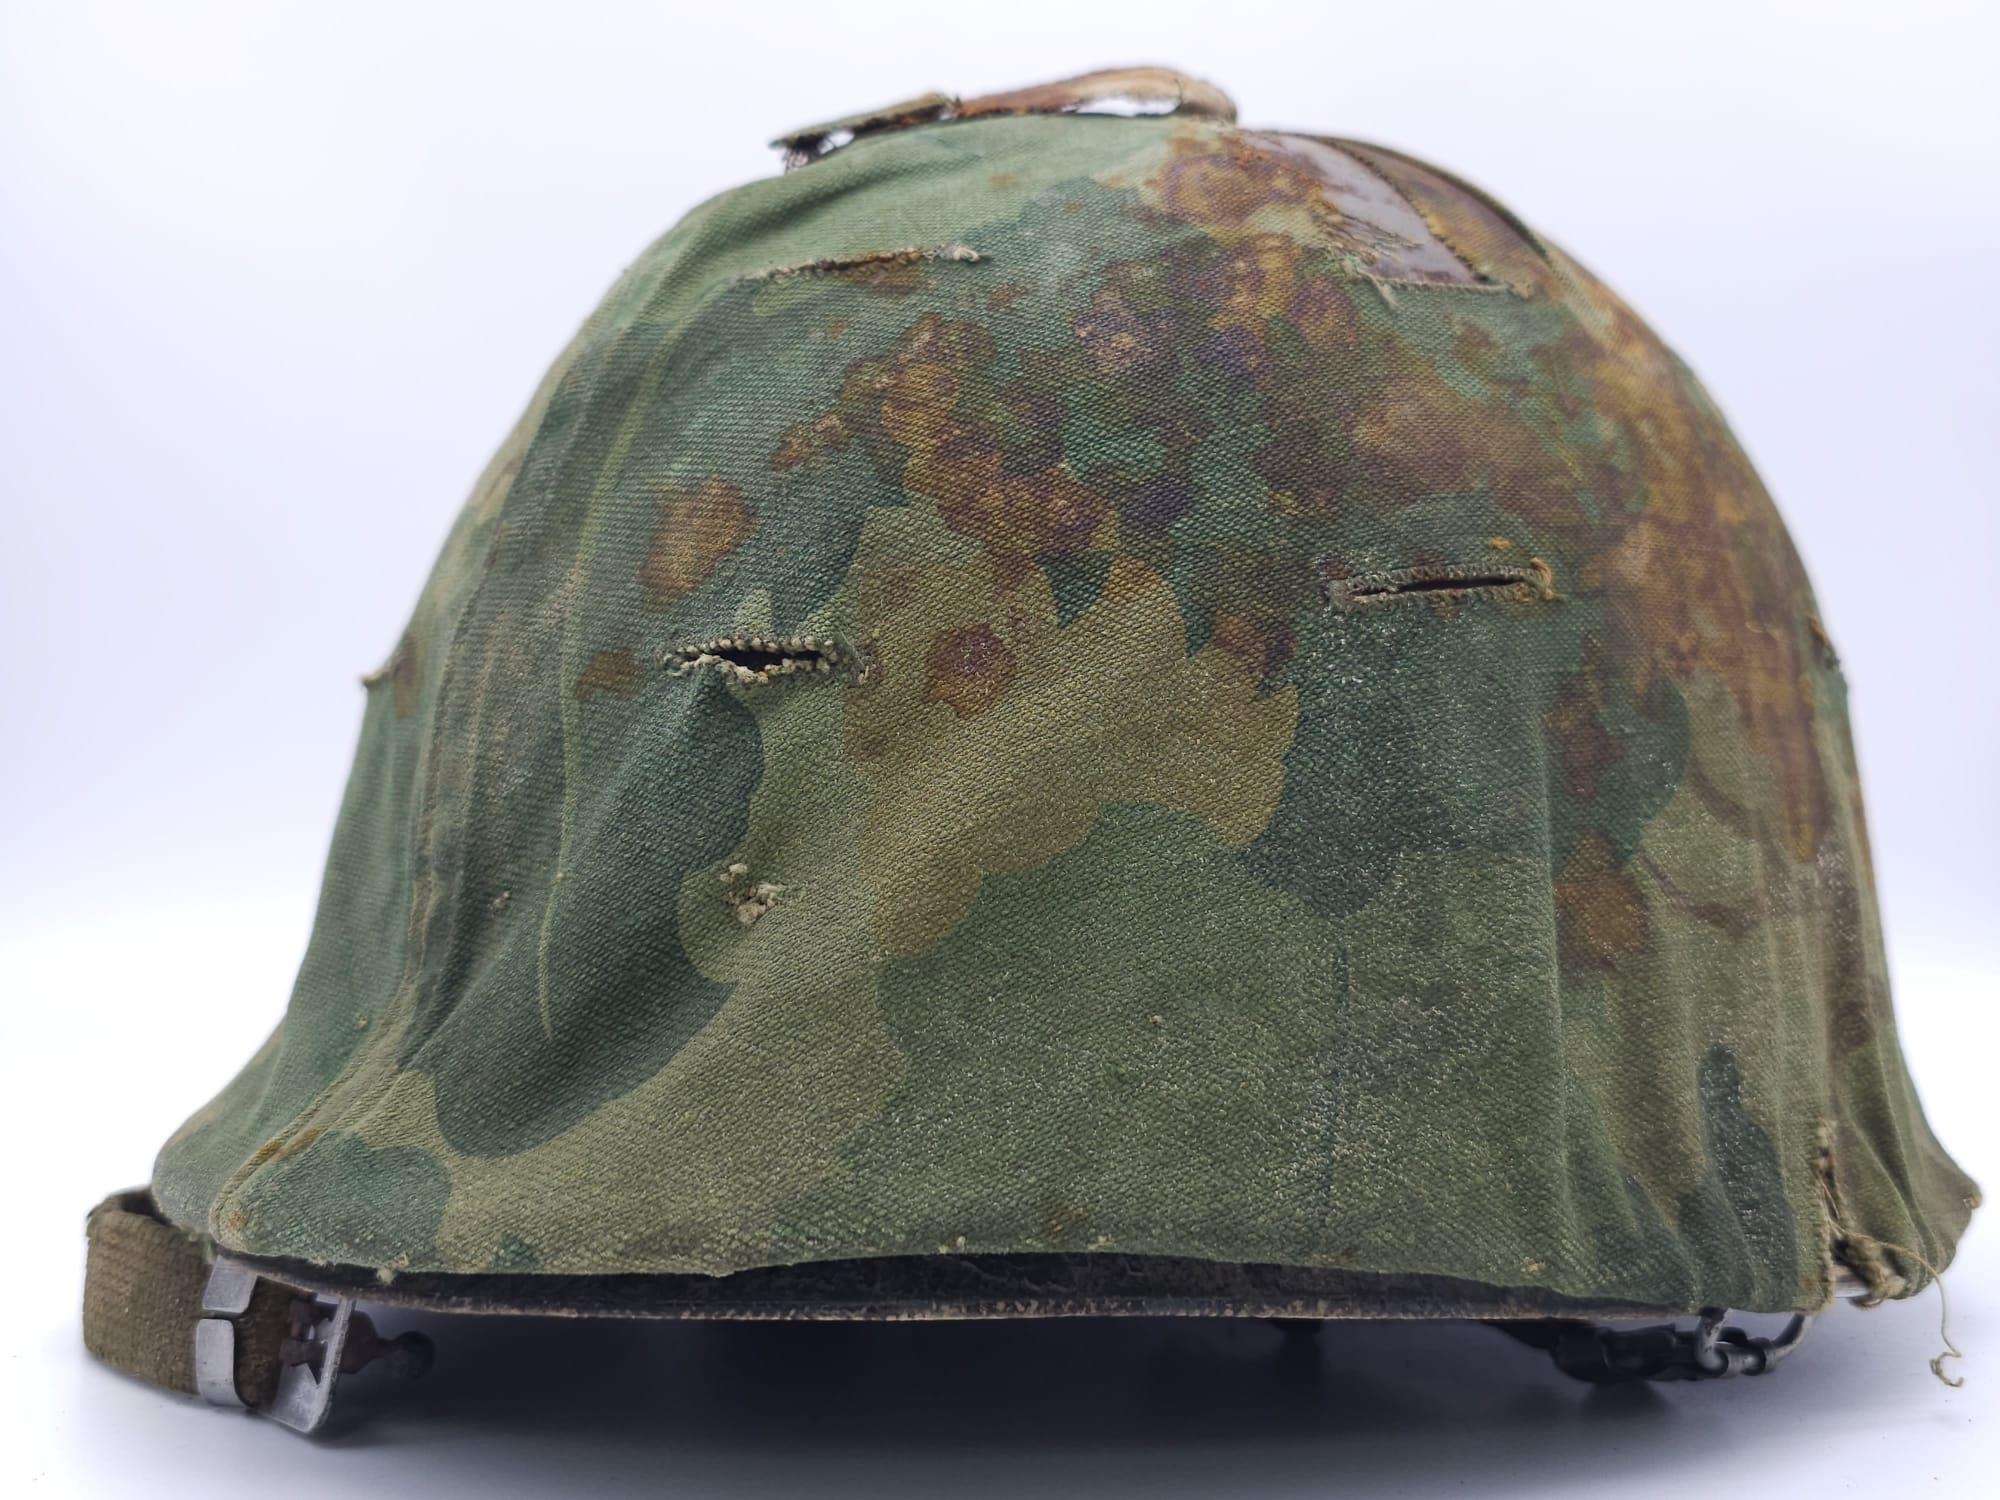 Vietnam War Era US M1 Helmet with Mitch pattern Cover and liner. Bought from a farmer in Da-Nang